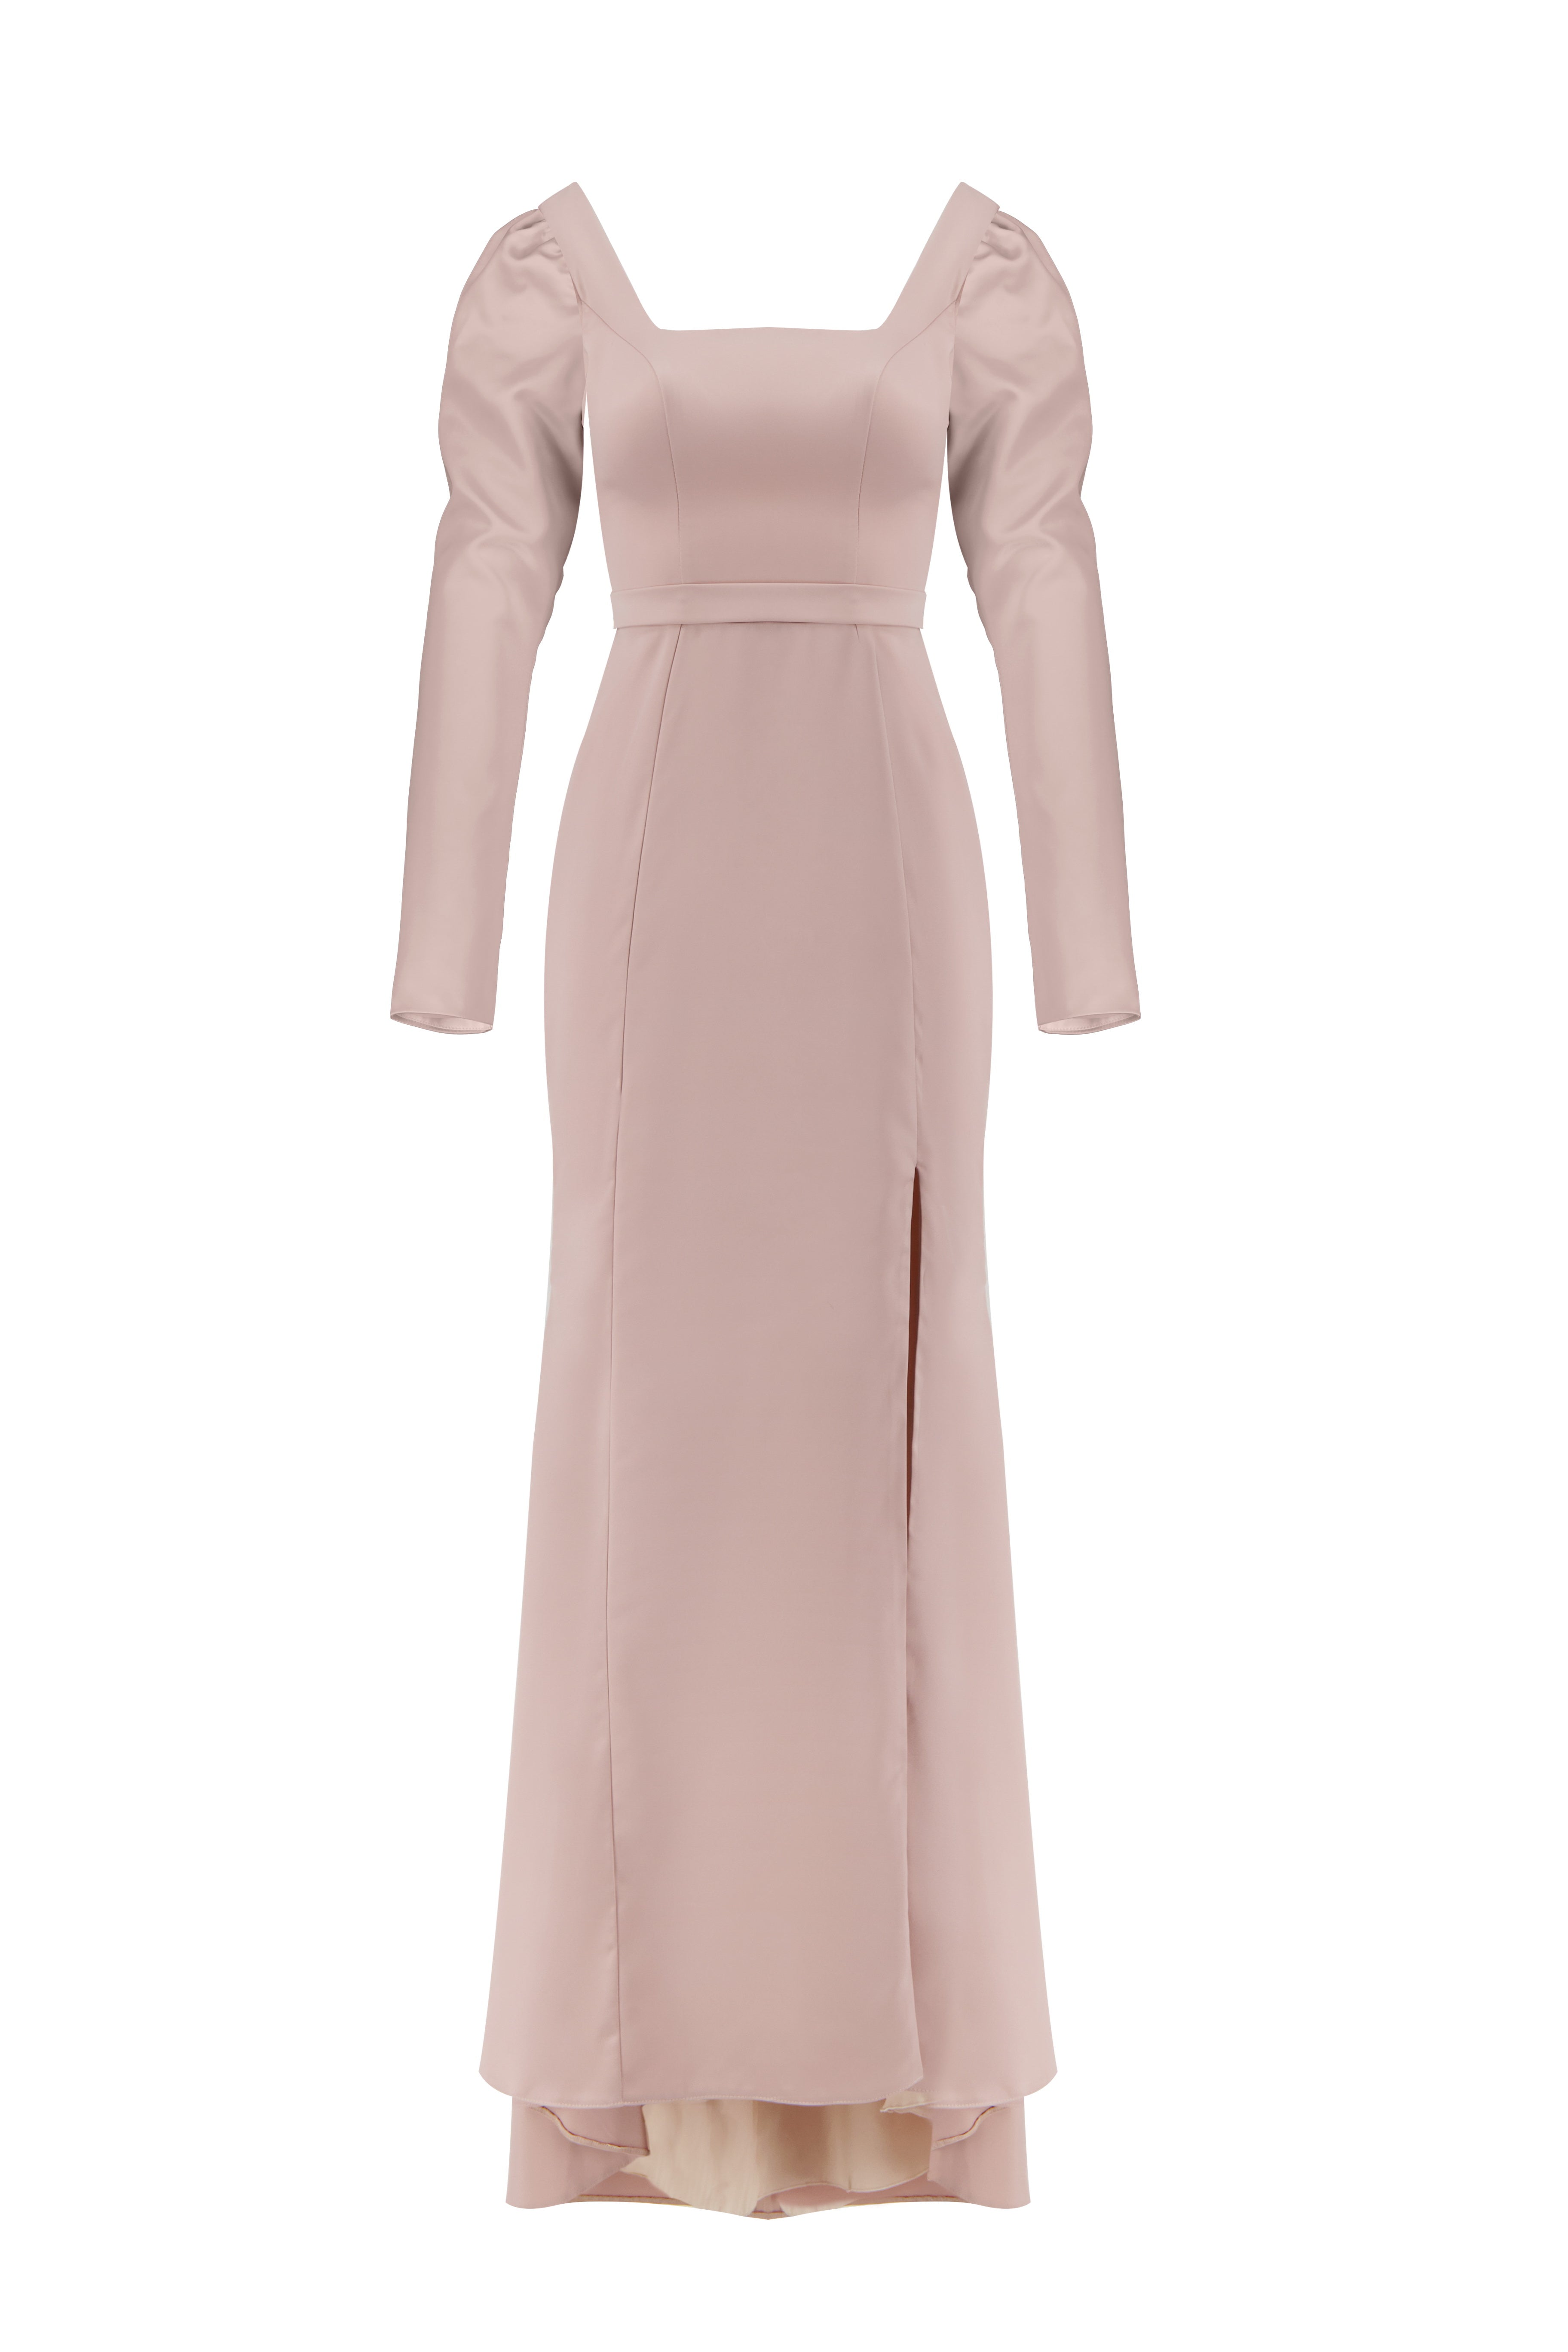 Front view of the powder colour evening dress